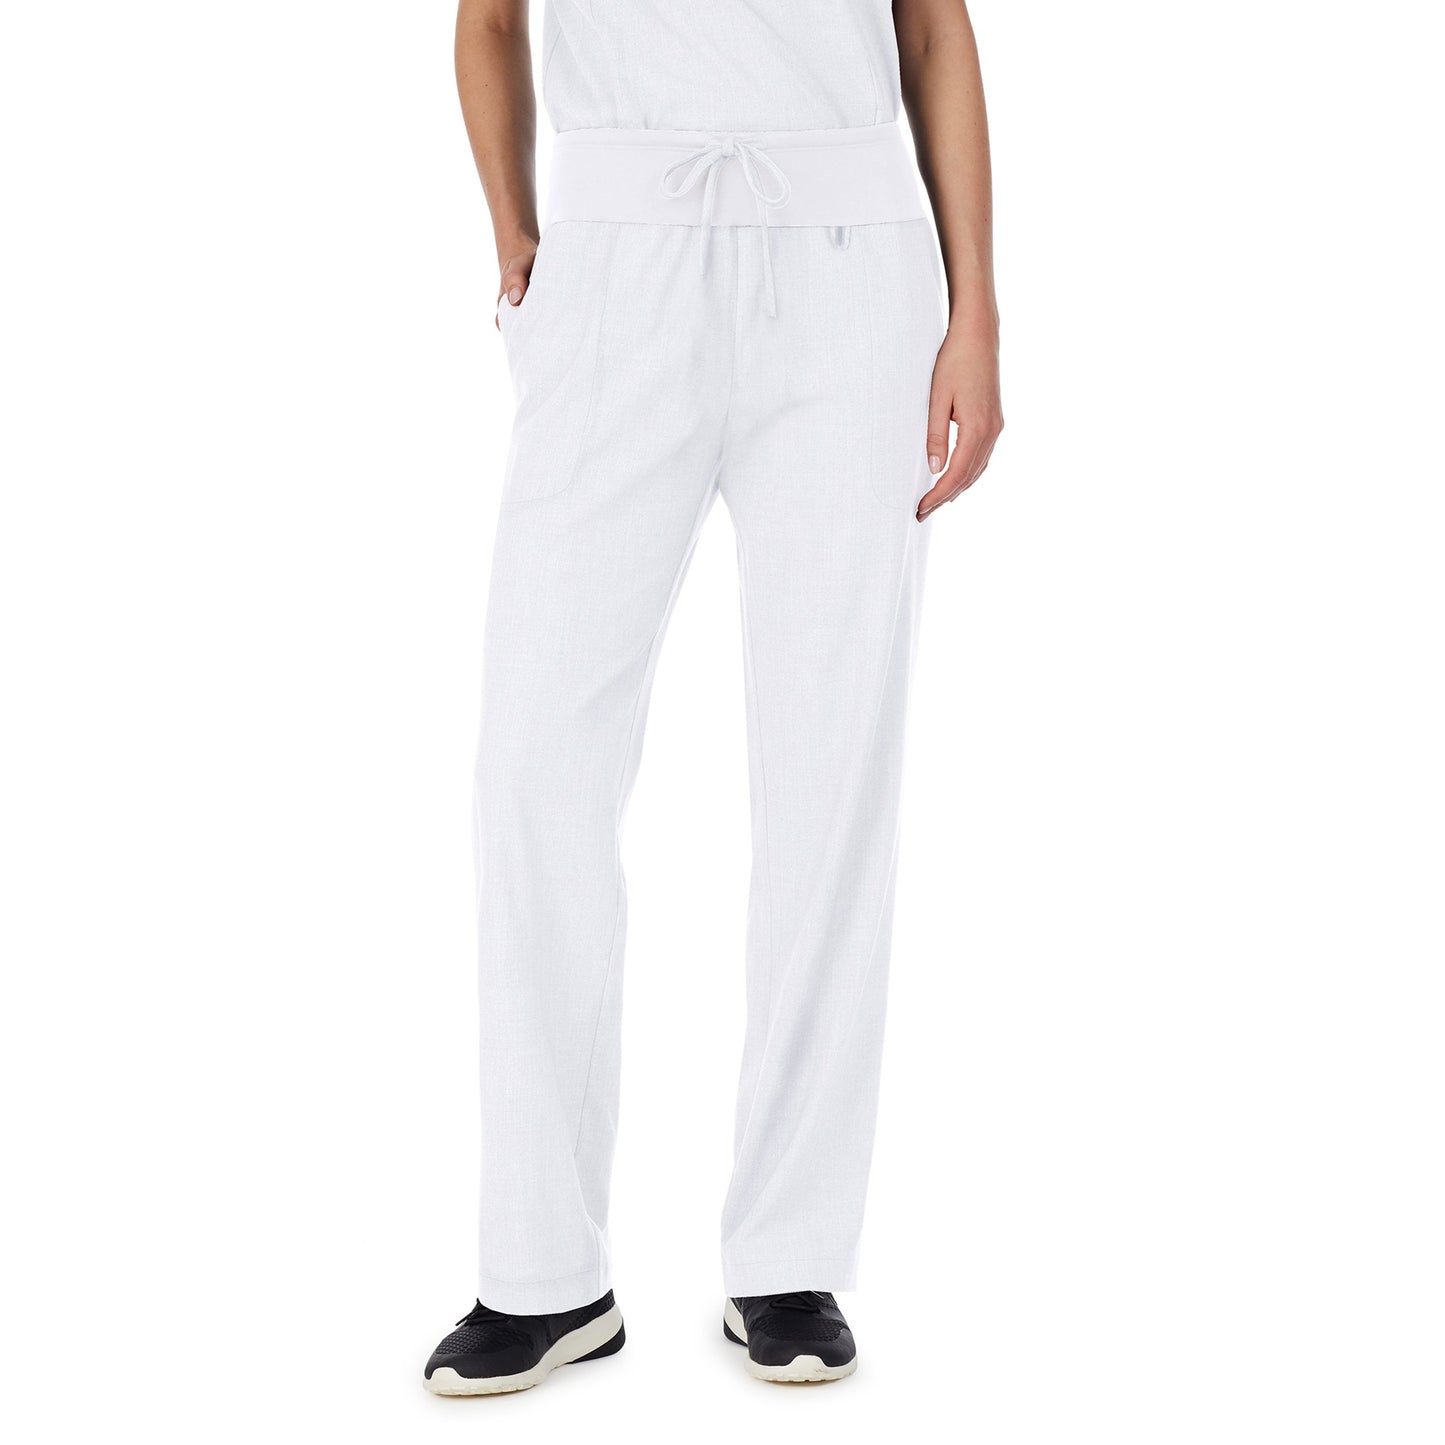 White;Model is wearing size S. She is 5’9”, Bust 32”, Waist 23", Hips 34.5”.@A lady wearing white scrub classic pant.